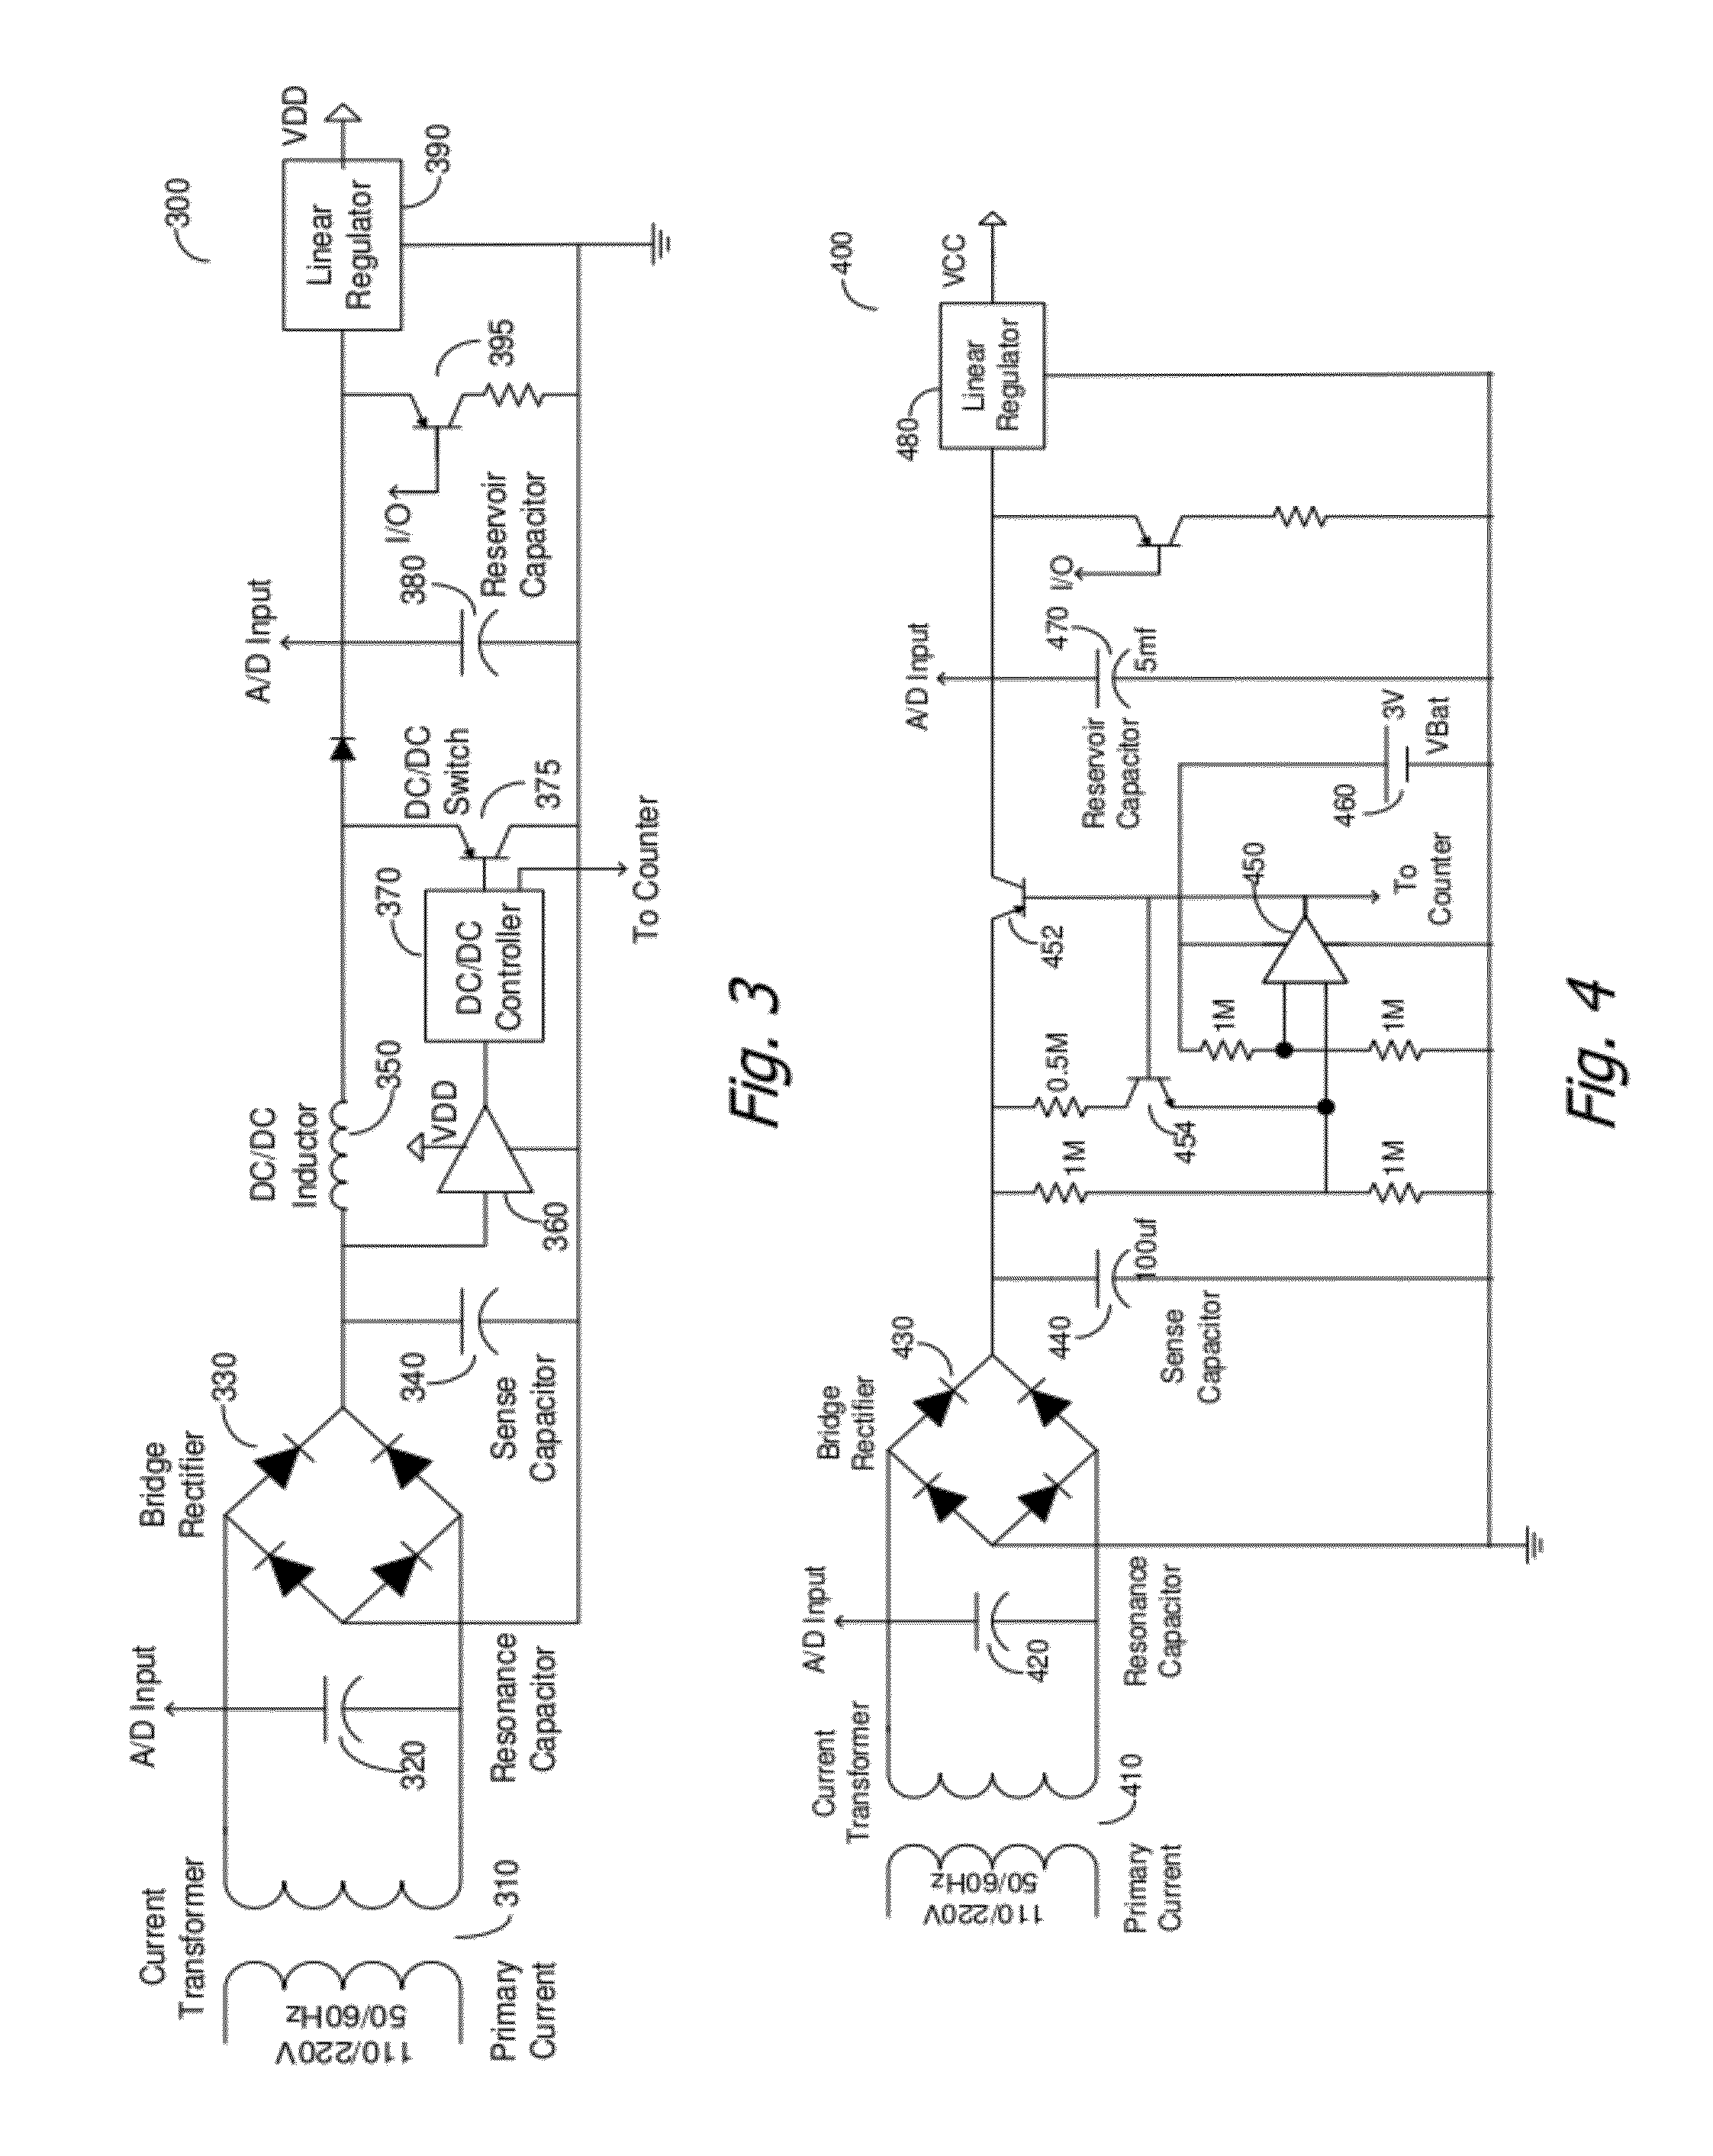 Distributed Electricity Metering System